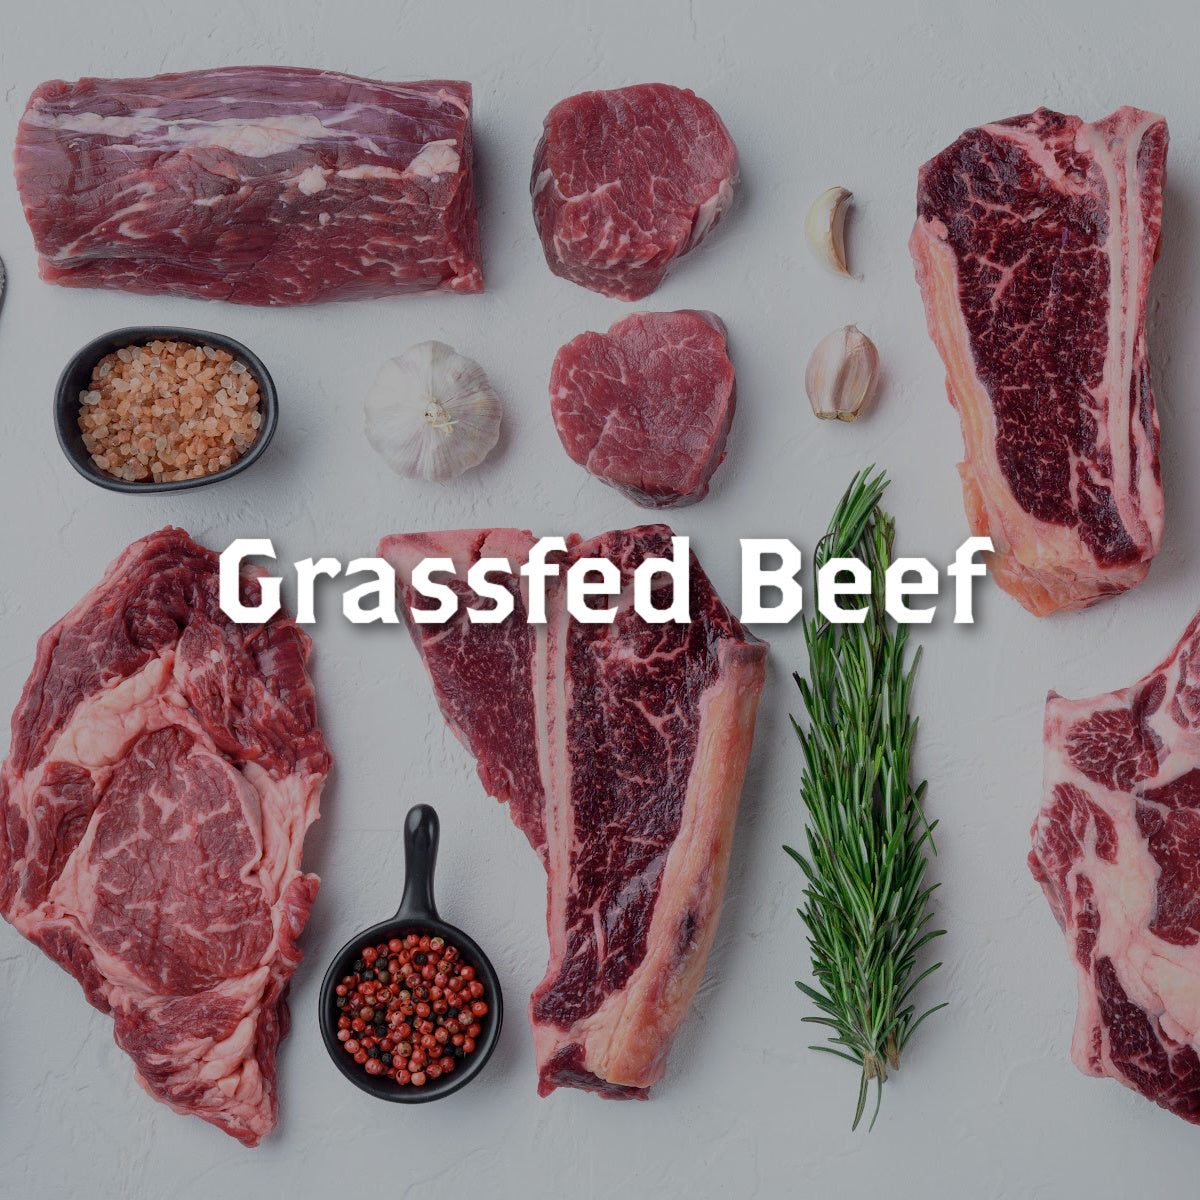 Rebel Pastures 100% Truly Grassfed Beef born, raised and slaughtered in the good 'ole USA